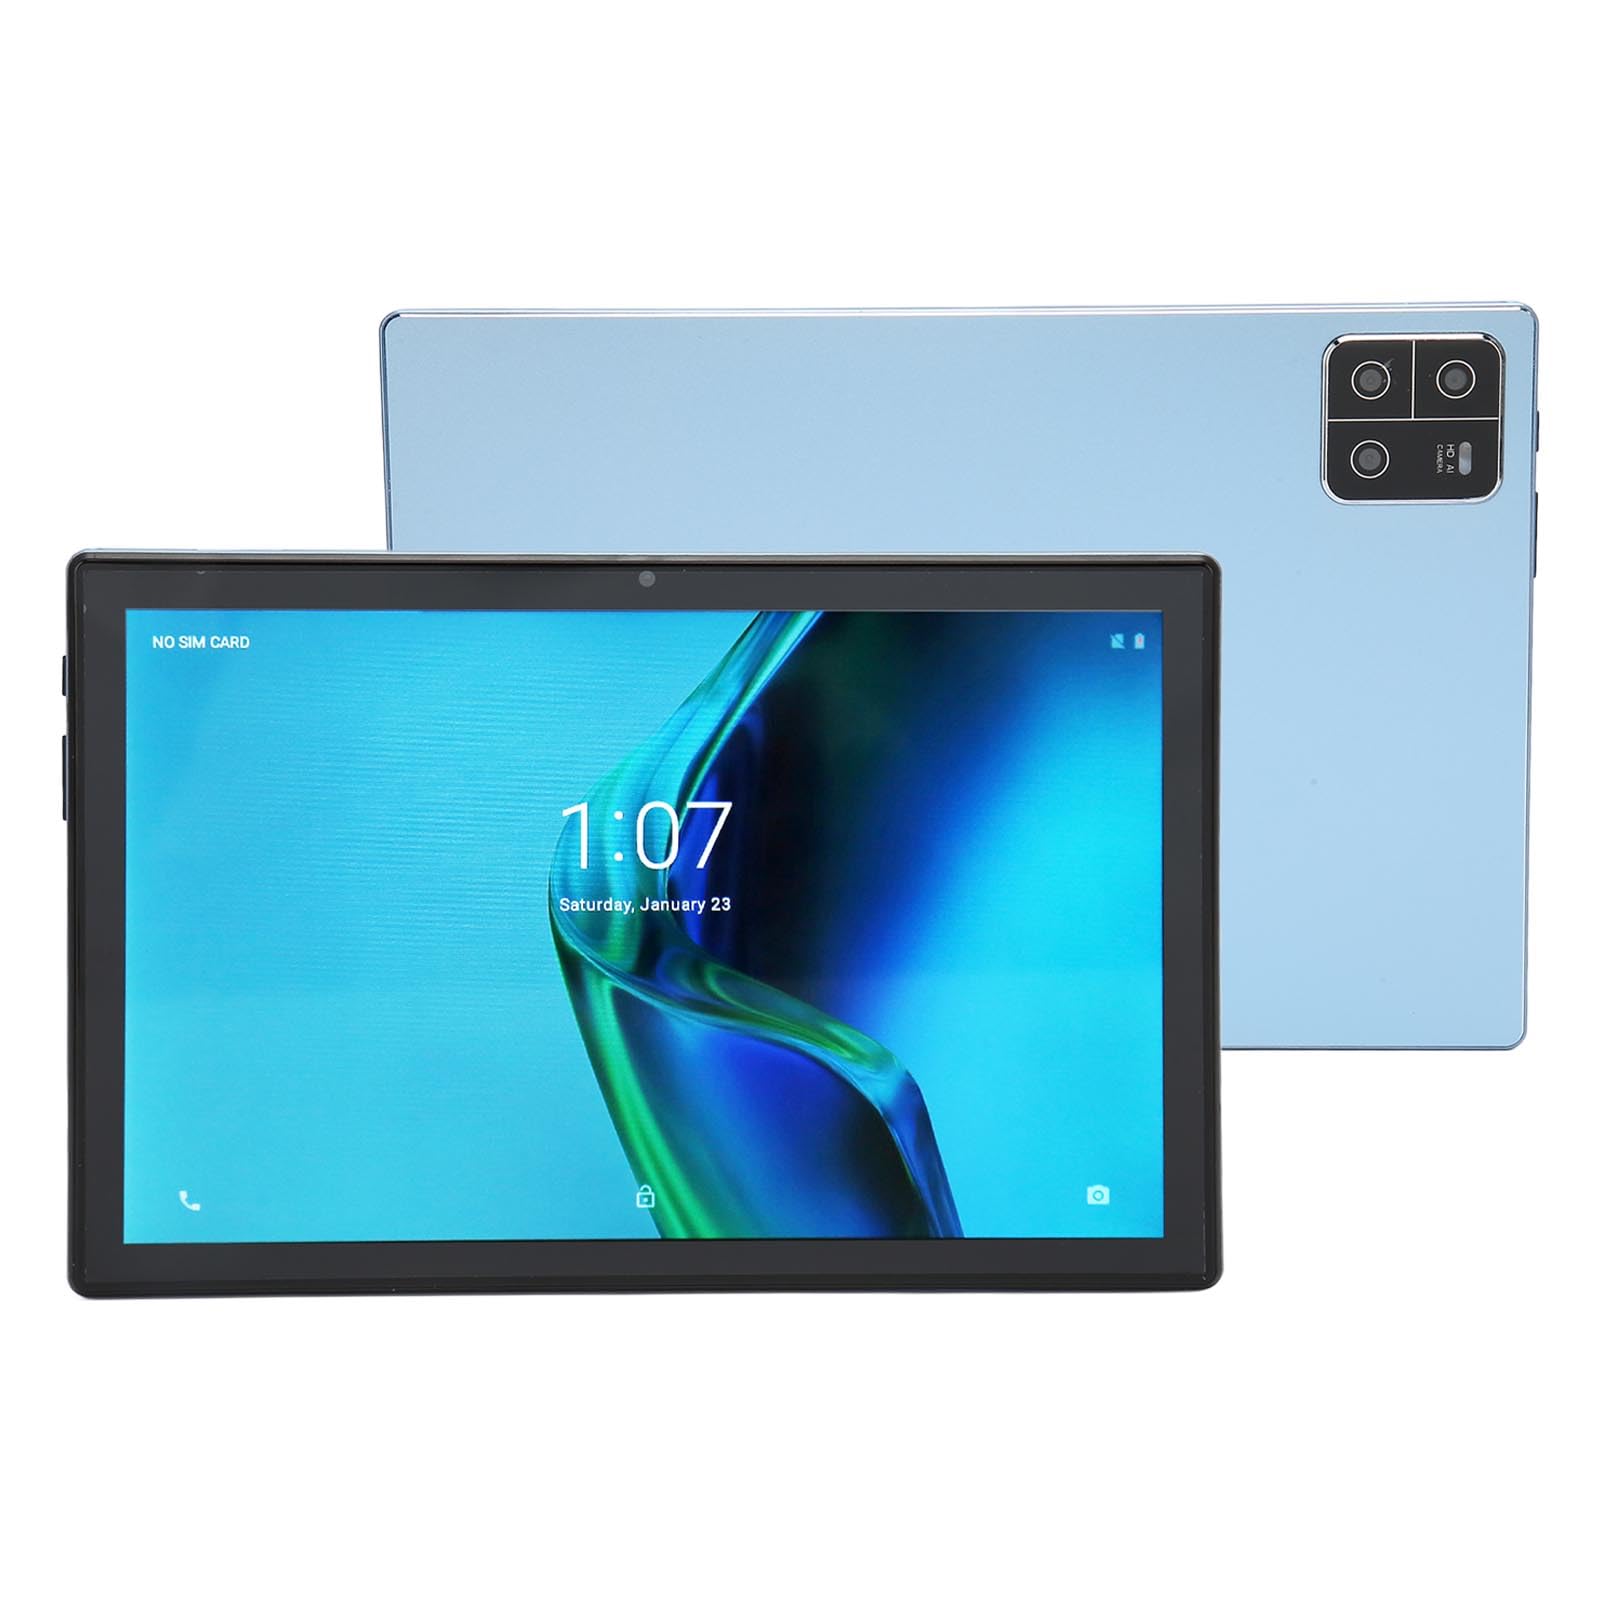 Airshi 10.1 Inch Tablet, 8GB RAM 128GB ROM 5G WiFi Octa CPU 4G LTE Tablet PC 13MP Rear Camera for Business for Work (Blue)